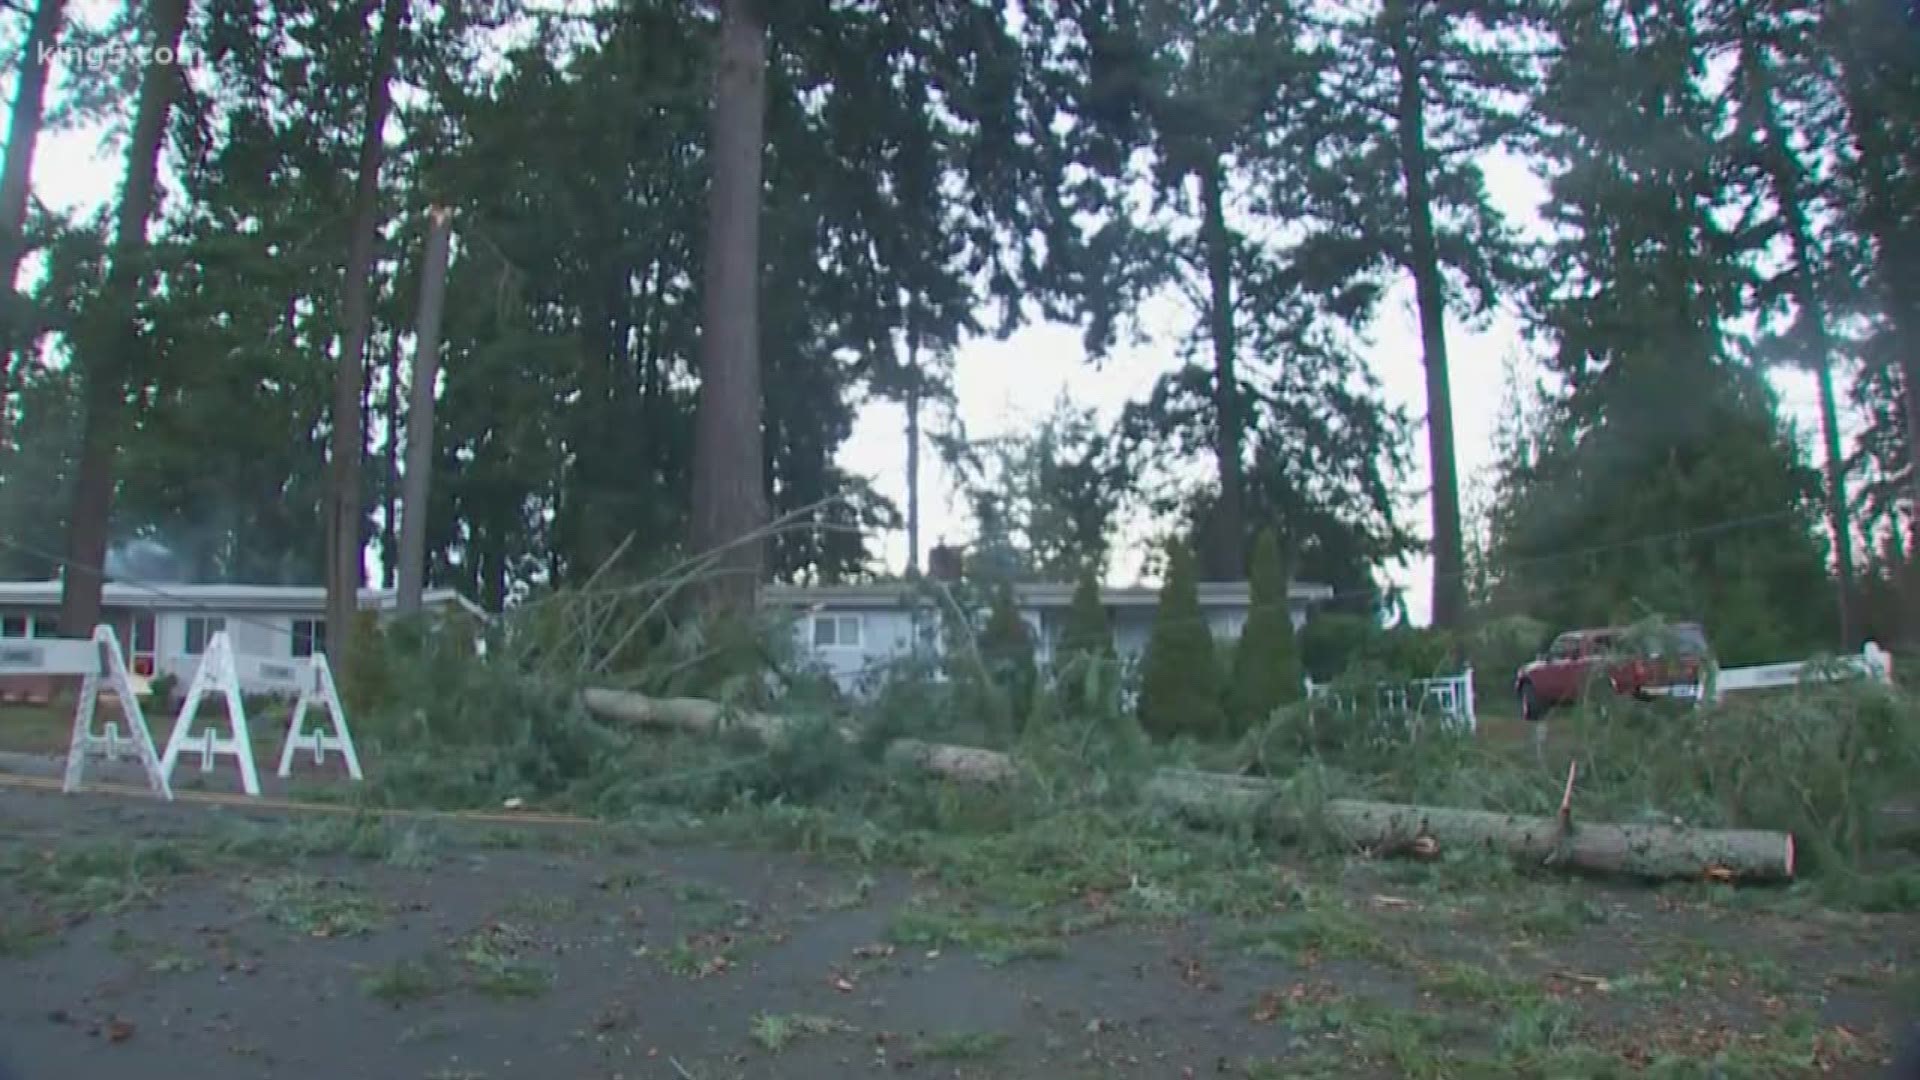 Freeway closures, downed trees, and power outages made for a tense Thursday as Western Washington was hit with another windstorm.